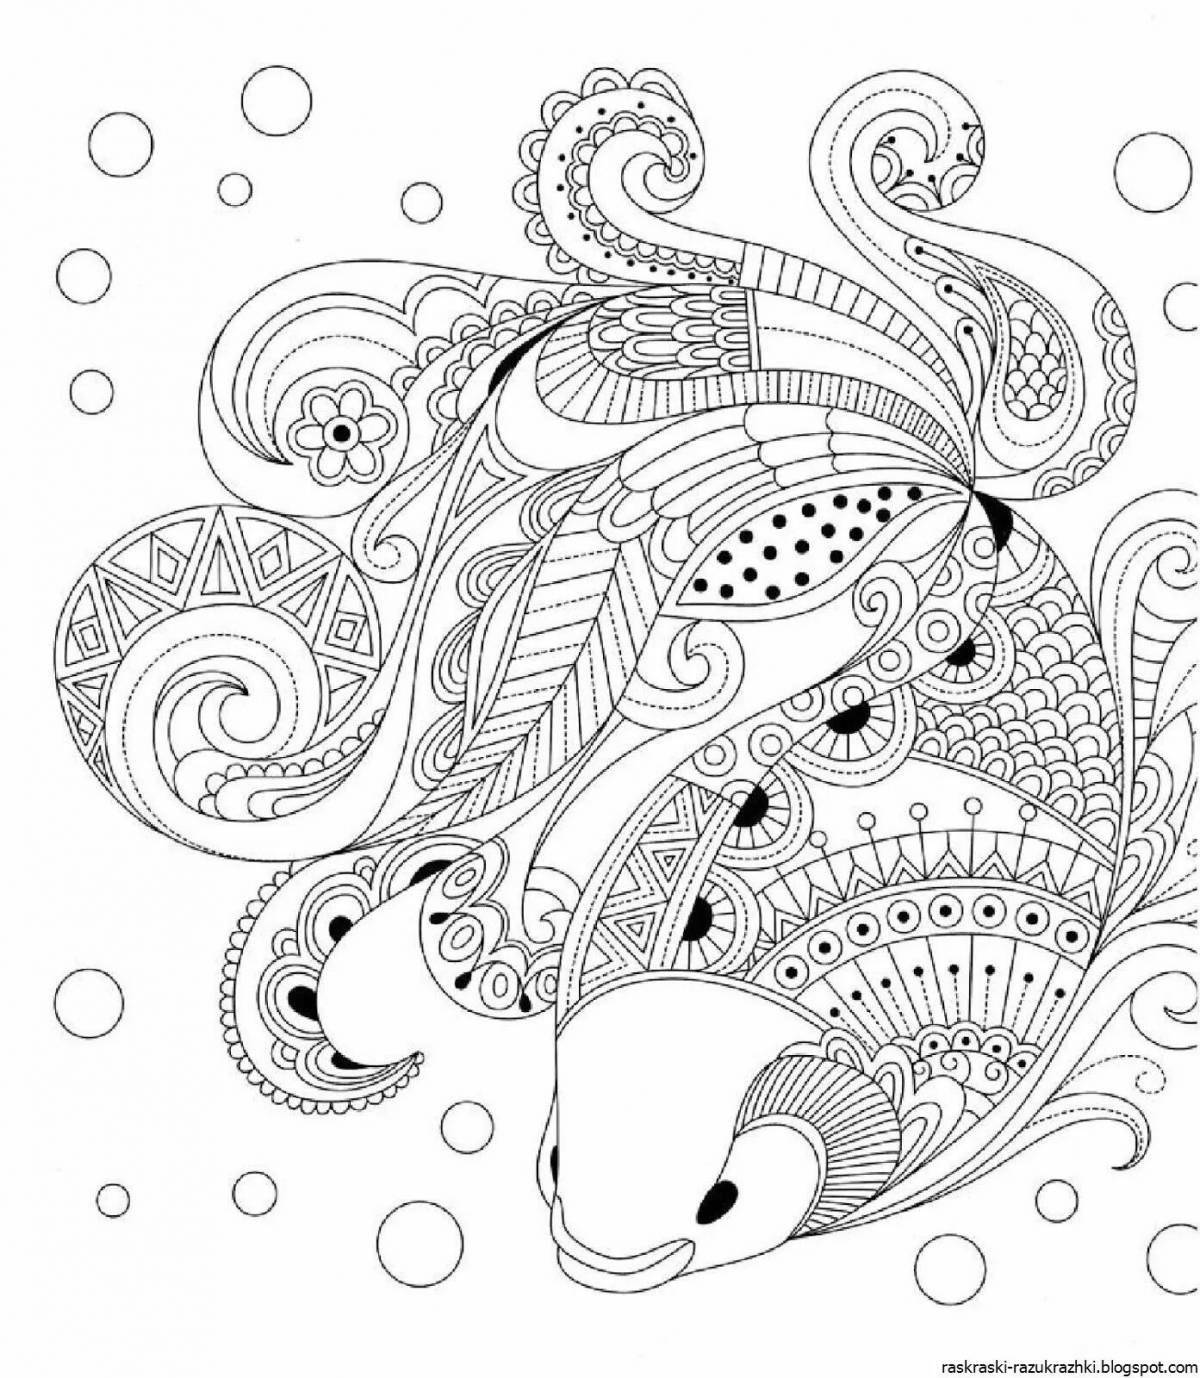 Sublime coloring page for adults ru complex